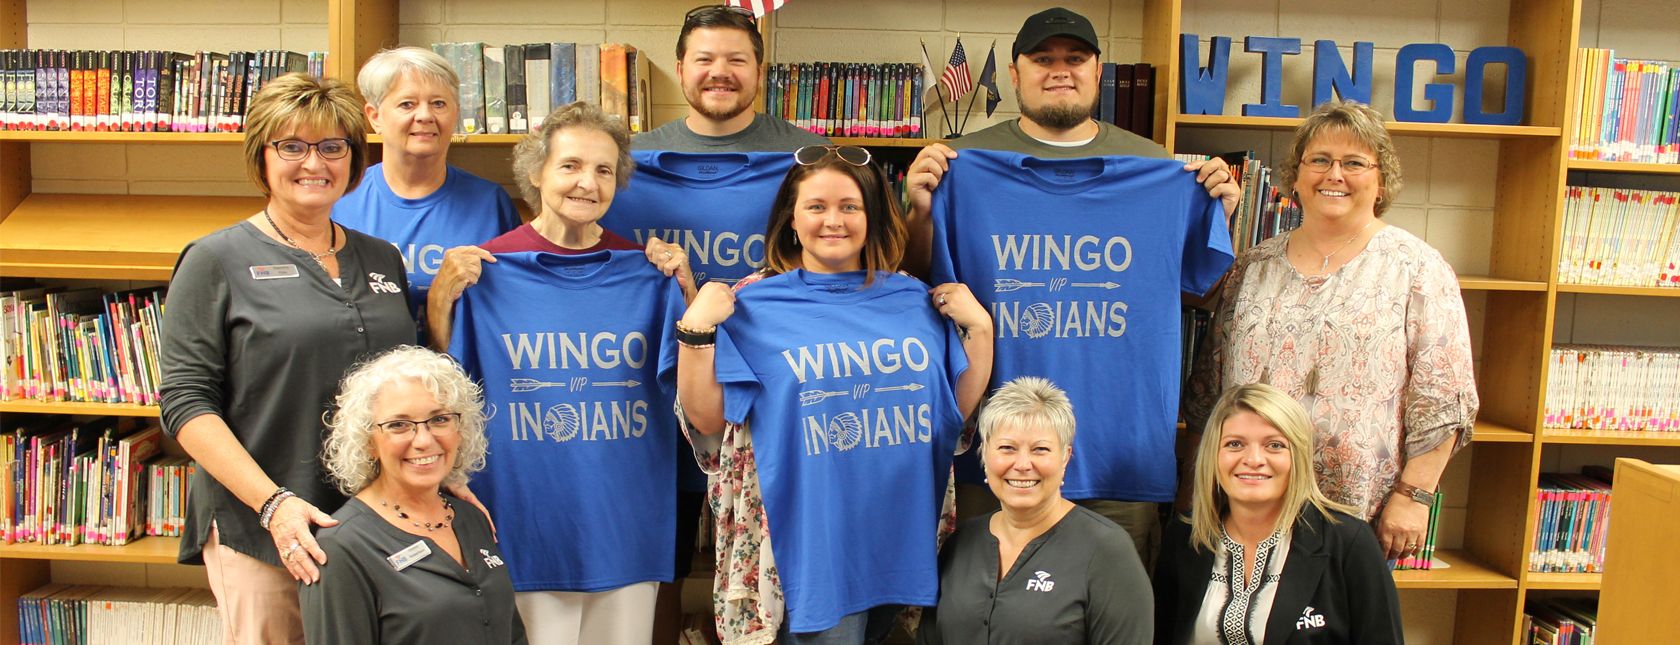 FNB bank employees with Wingo Indians friends holding up Wingo Indians shirts